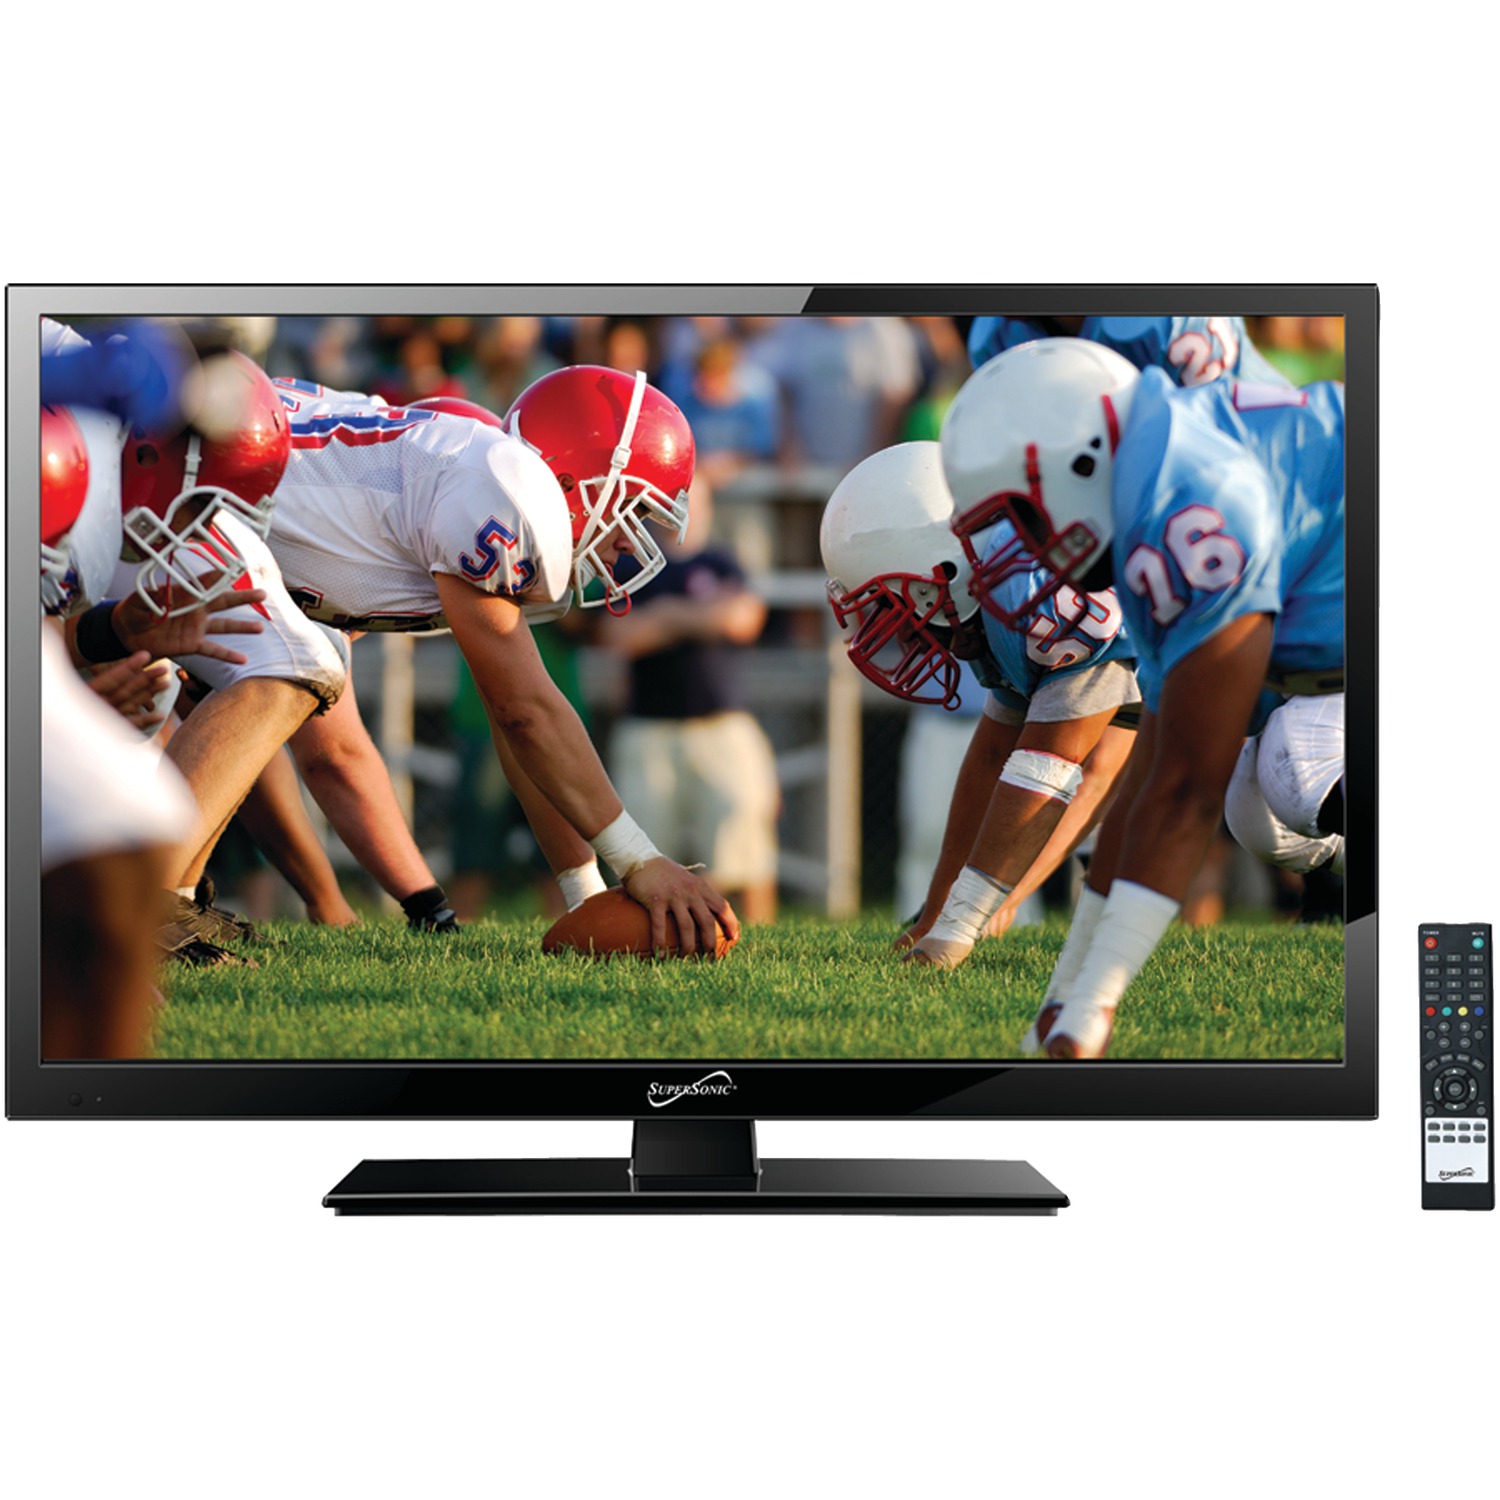 Supersonic 818549028535 19 in. Class HD 720P LED TV & Stanley TMX-102FM Full-Motion Mount - image 4 of 4